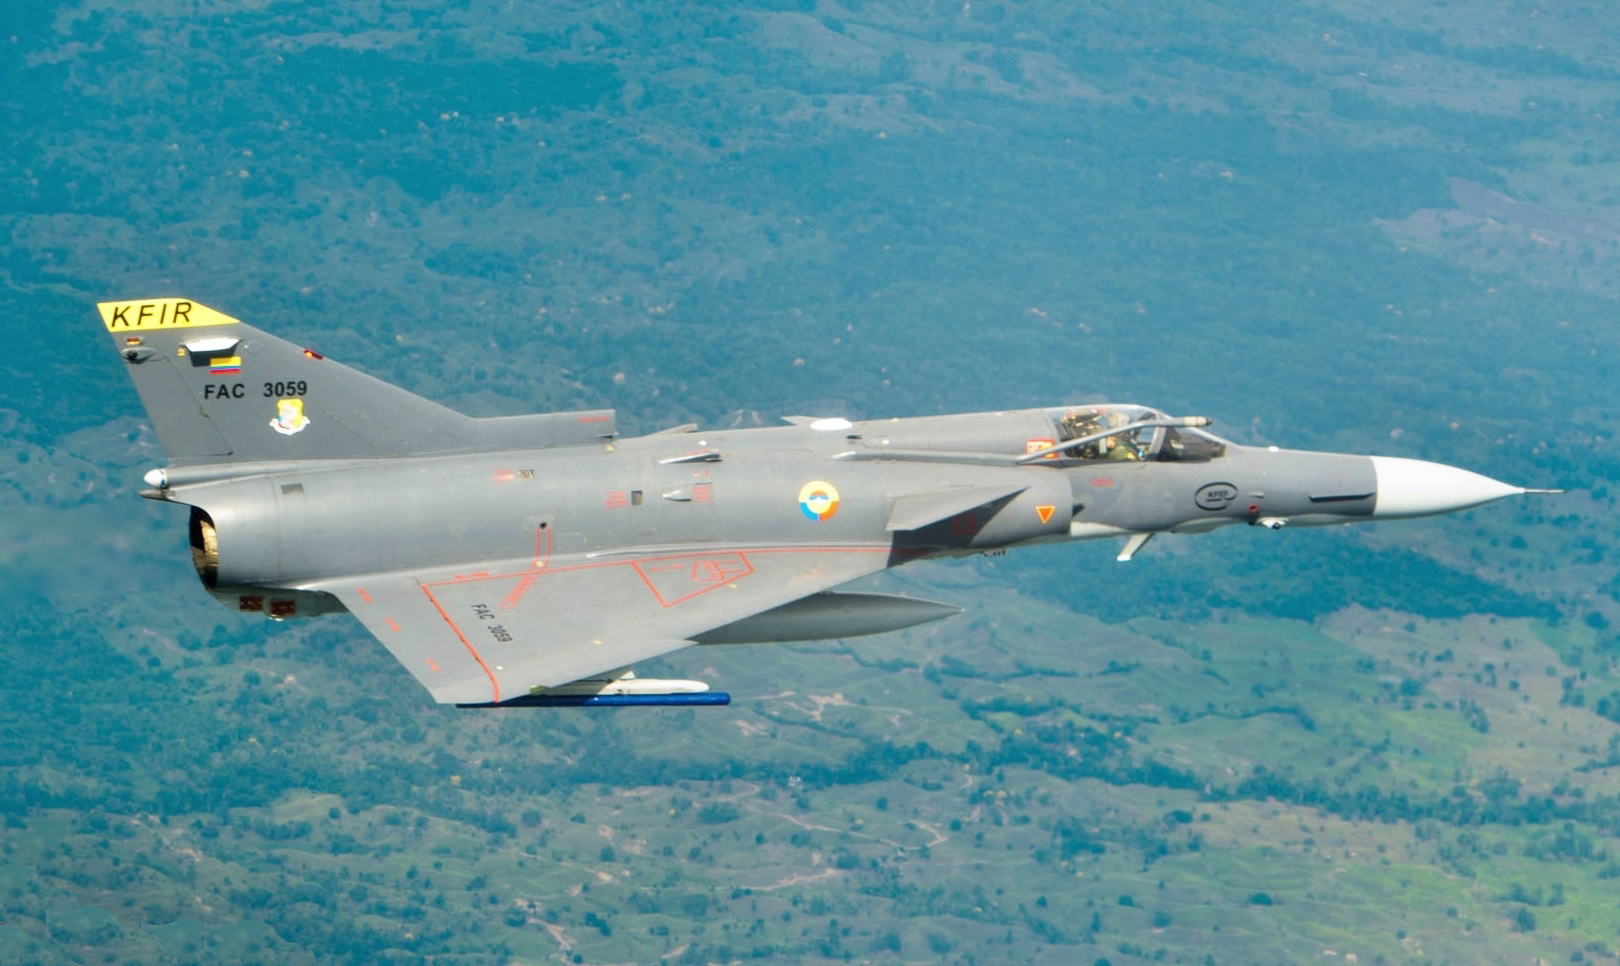 File:Colombia Kfir (cropped).jpg - Wikimedia Commons